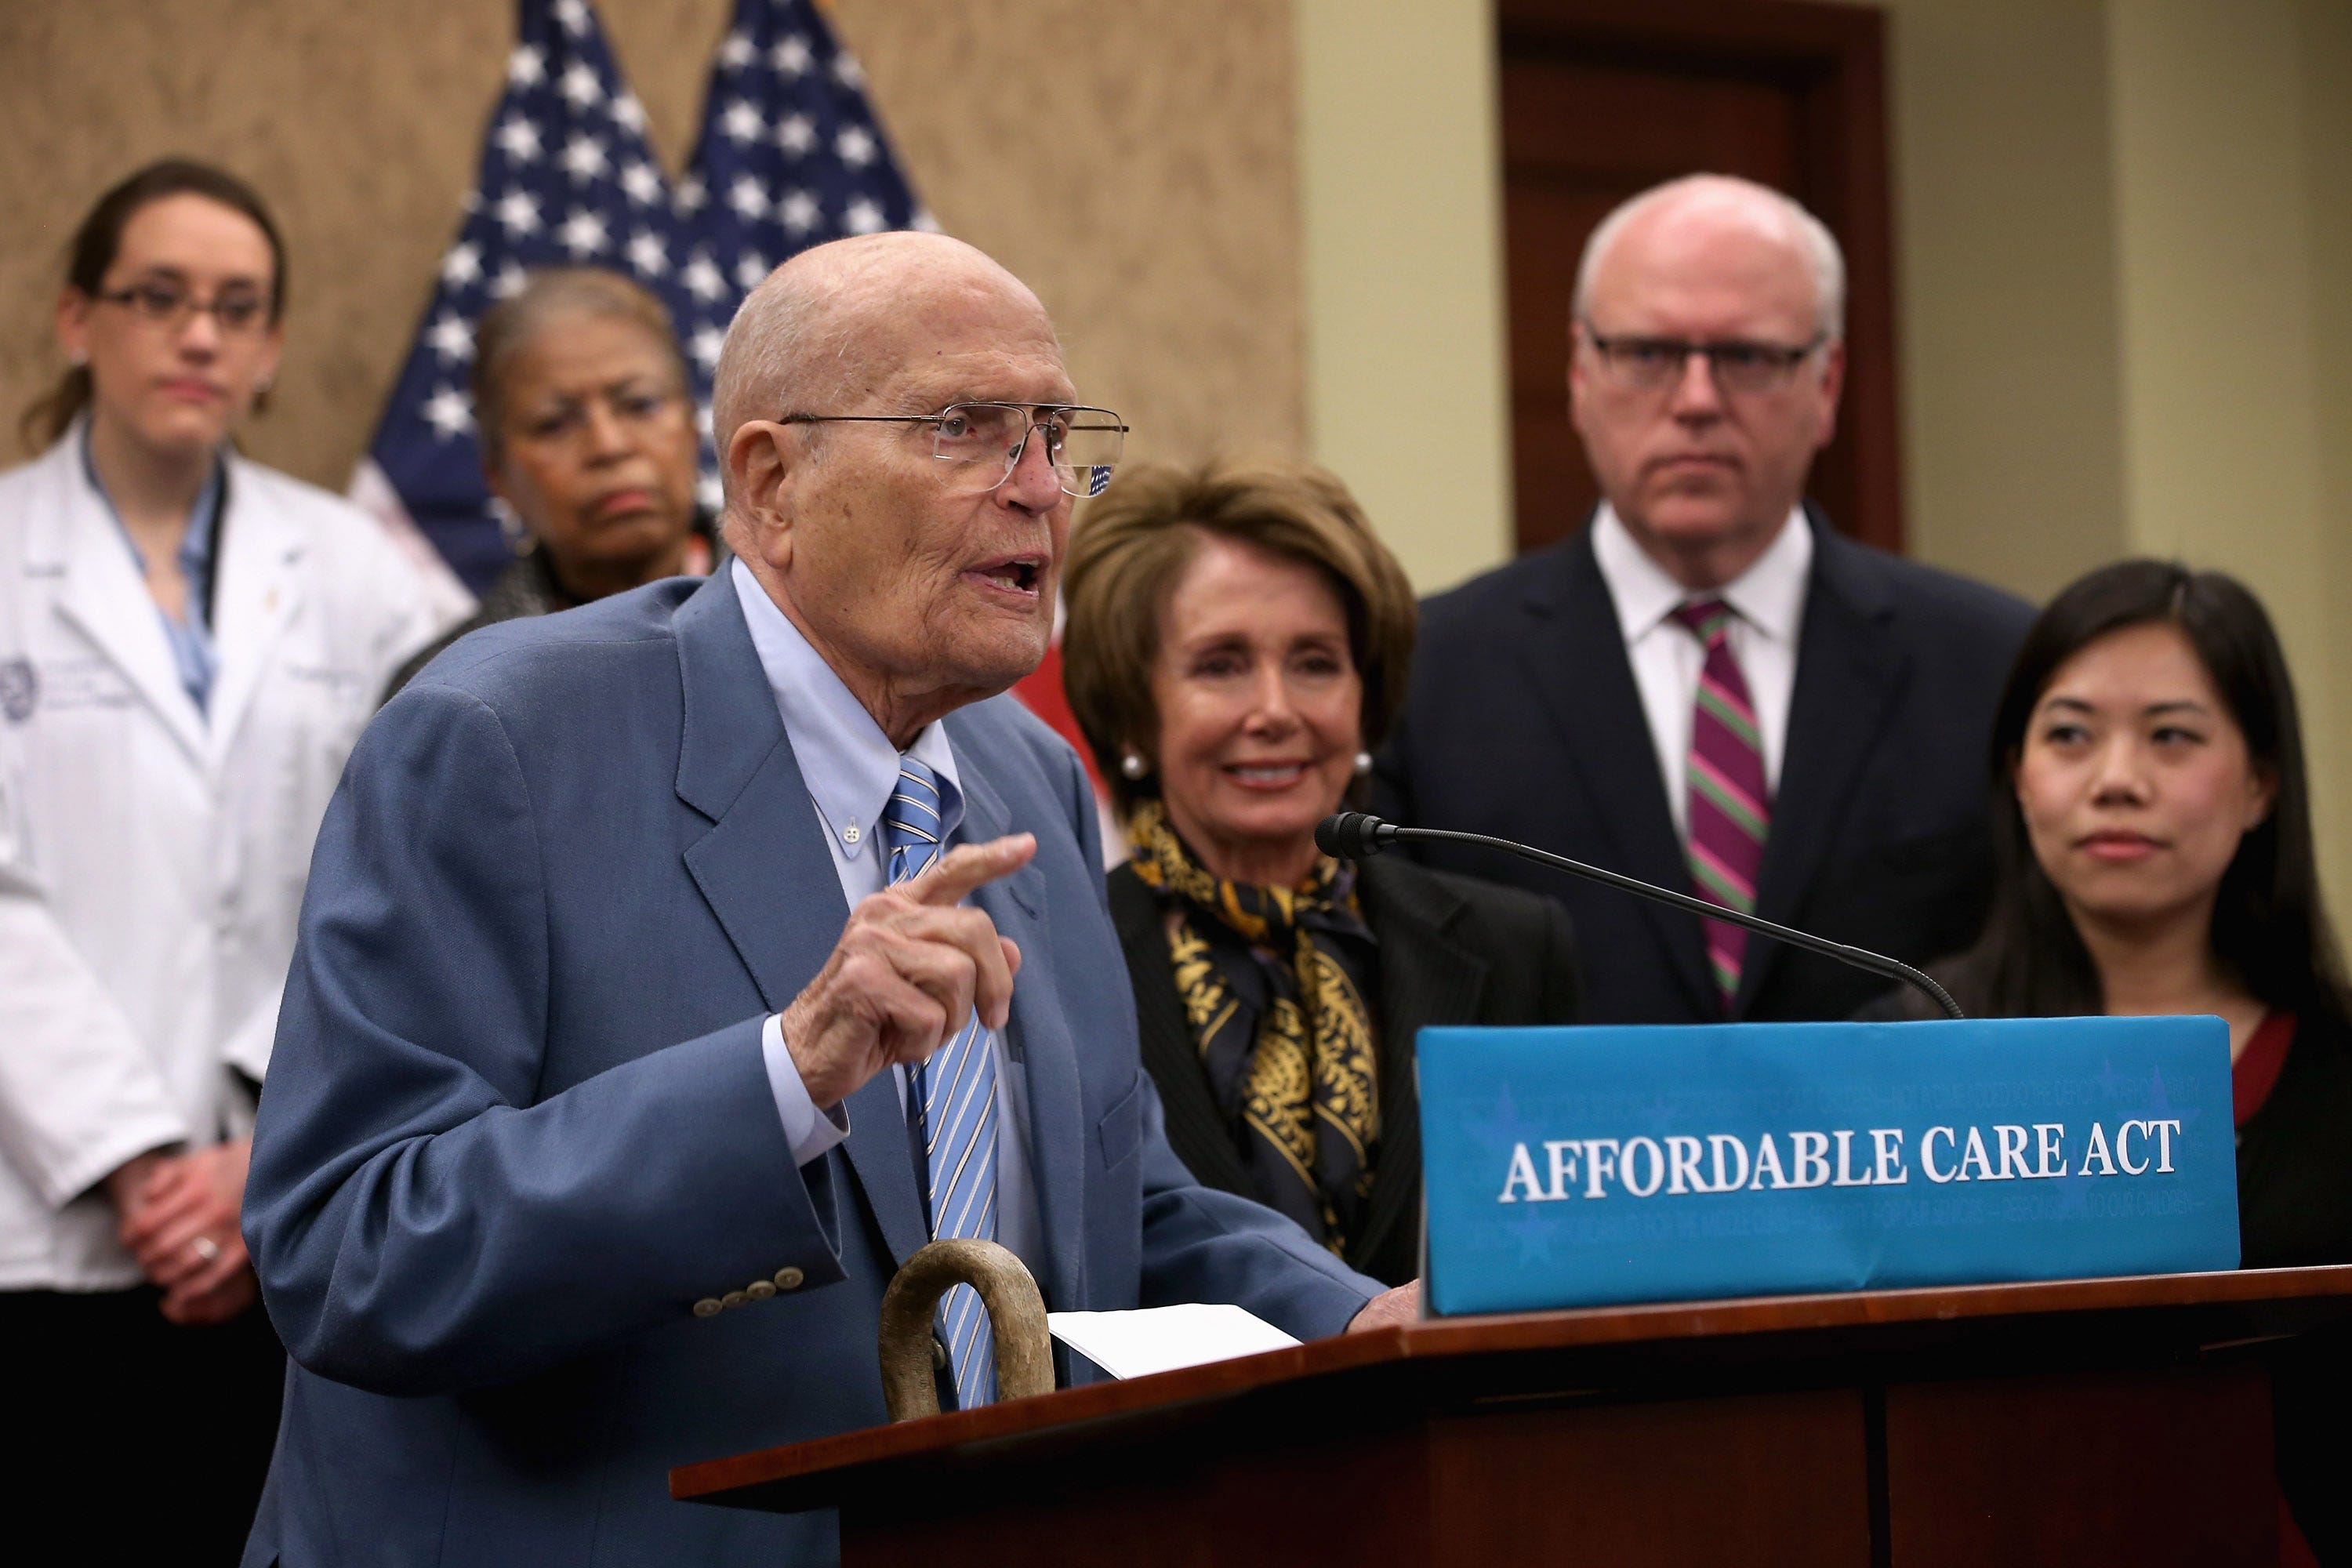 Dingell speaks during an event marking the third anniversary of the passage of the Affordable Care Act at the U.S. Capitol on March 20, 2013 in Washington, DC.  Early the following year, at age 87, he would announce his retirement.